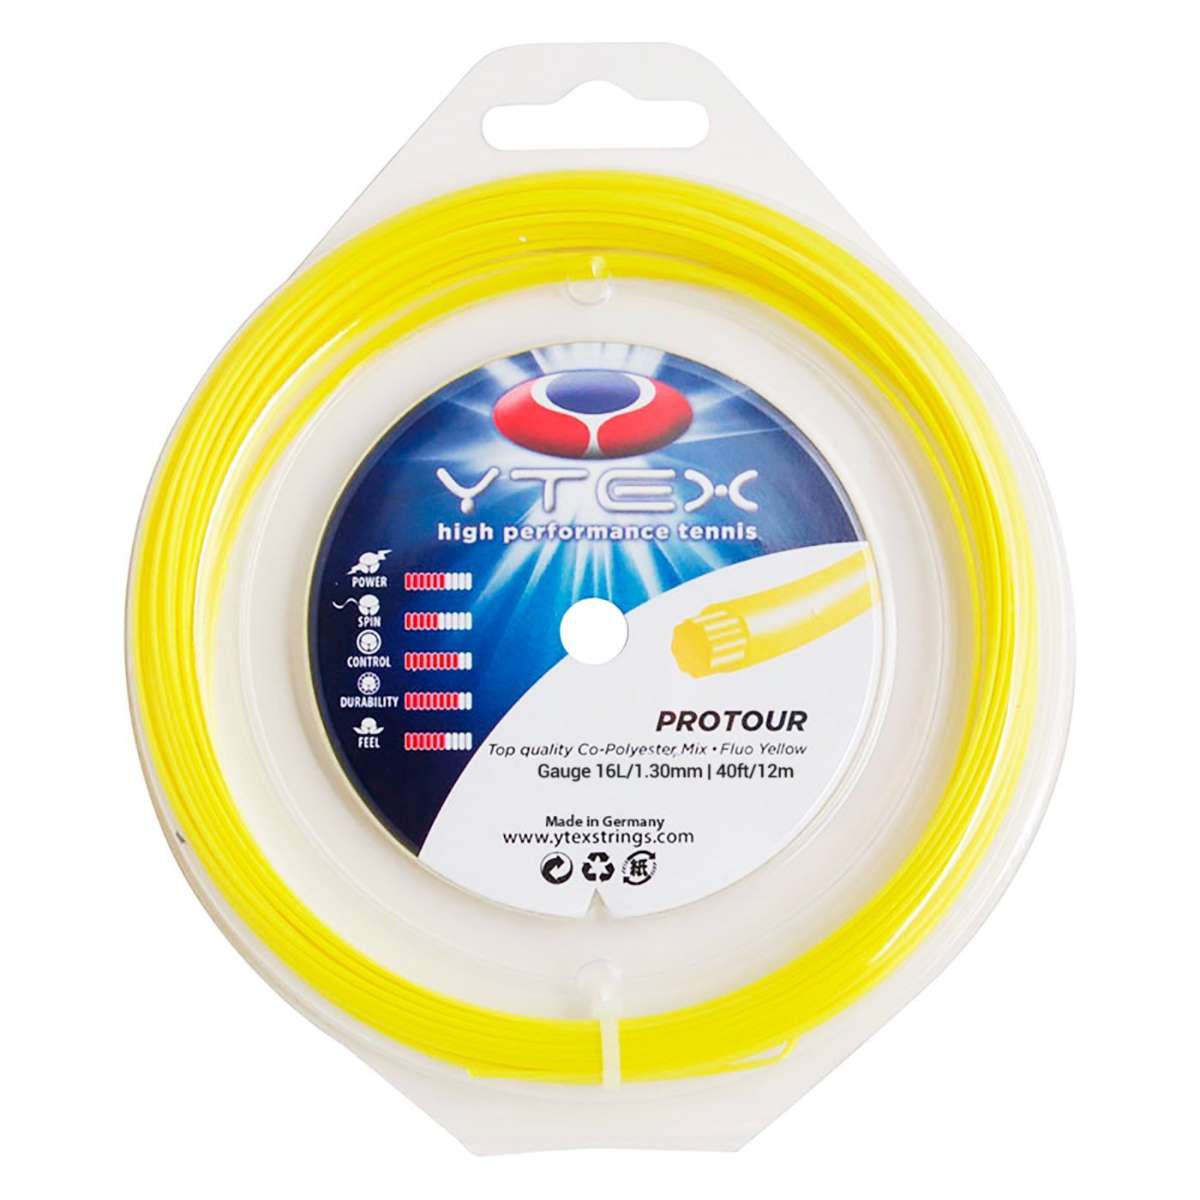 Protour Fluo Yellow, 40 ft, 16-1.30 mm Strings Single Set Und.